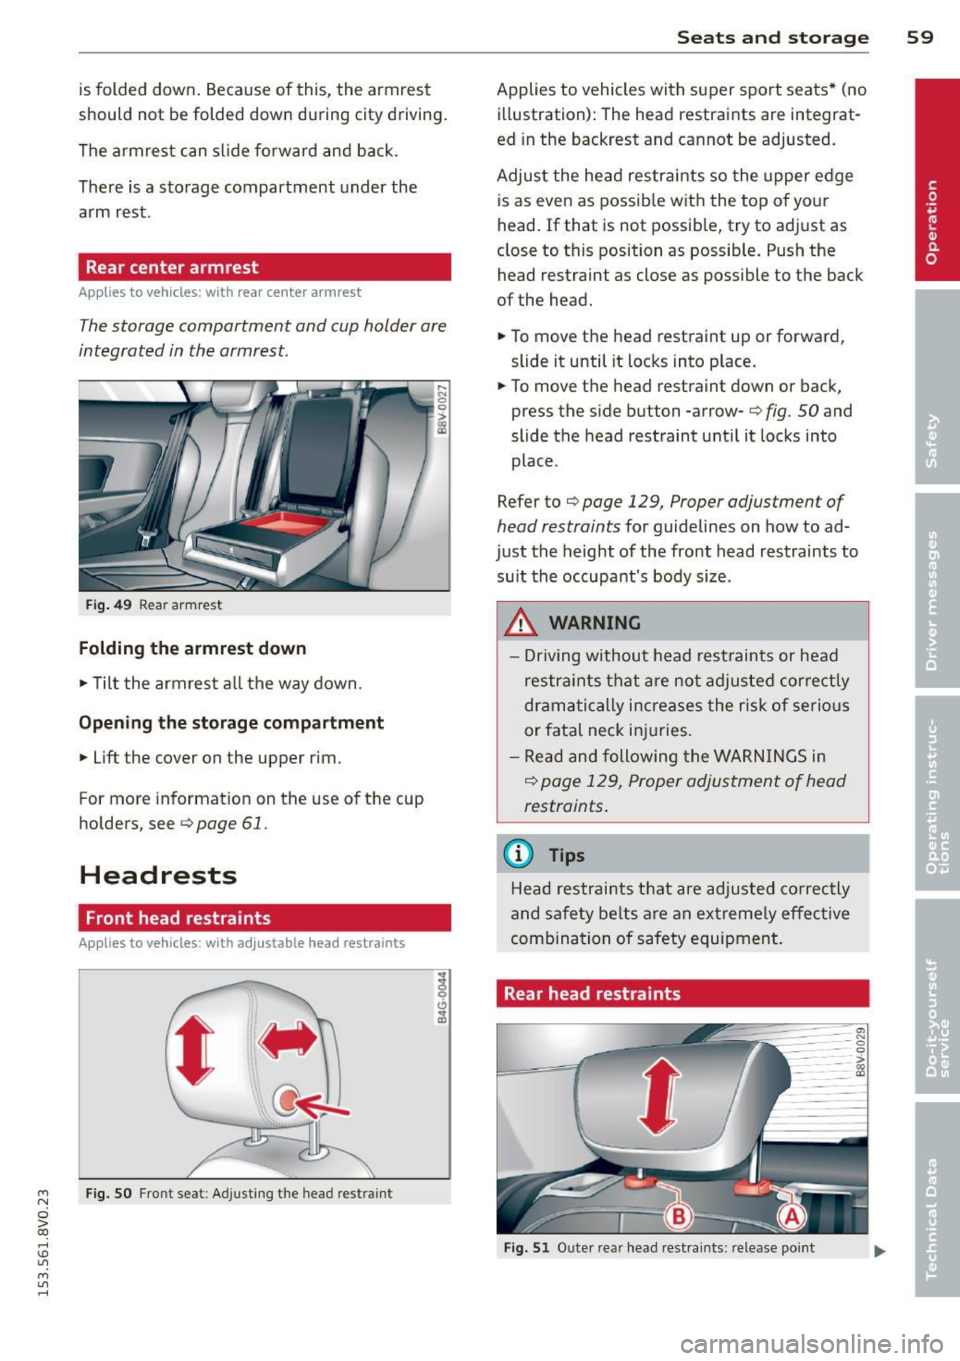 AUDI S3 2015  Owners Manual ...., 
N 
0 > co 
rl I.O 
" ...., 
" rl 
is folded  down. Because  of this,  the  armrest 
should  not  be  folded  down  during  city driving. 
The  arm rest  can  slide  forward  and  back. 
There